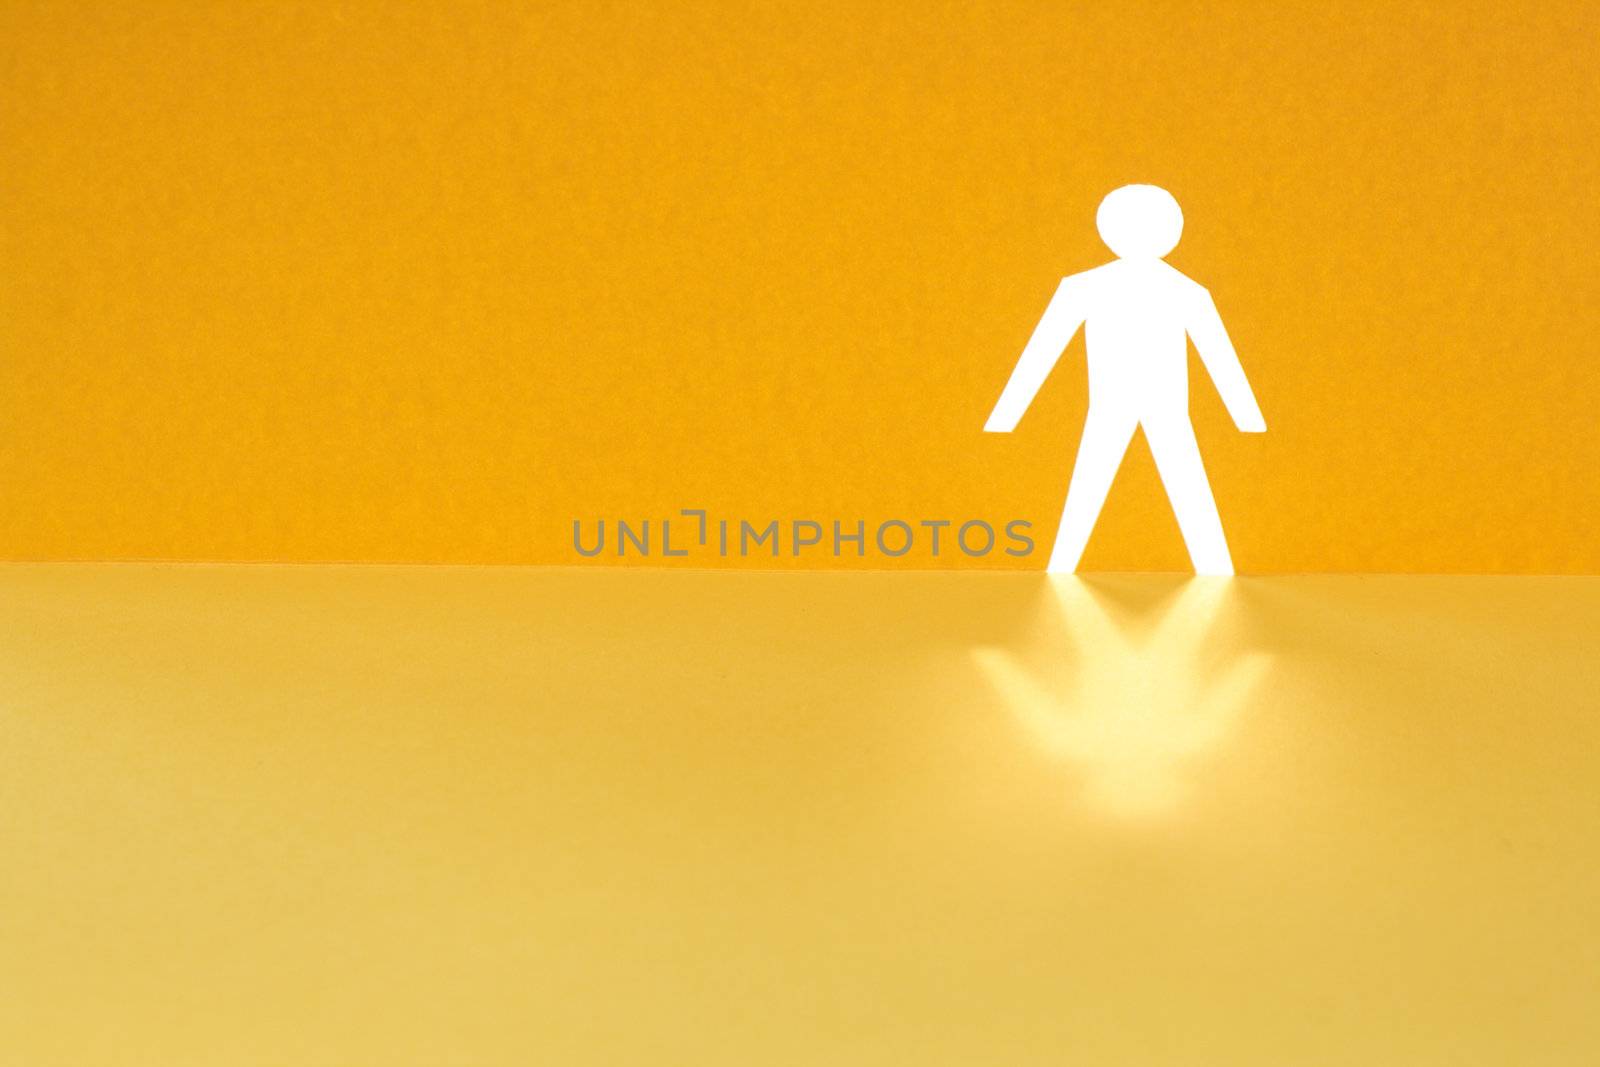 Abstrack background with man figure cutting from yellow paper